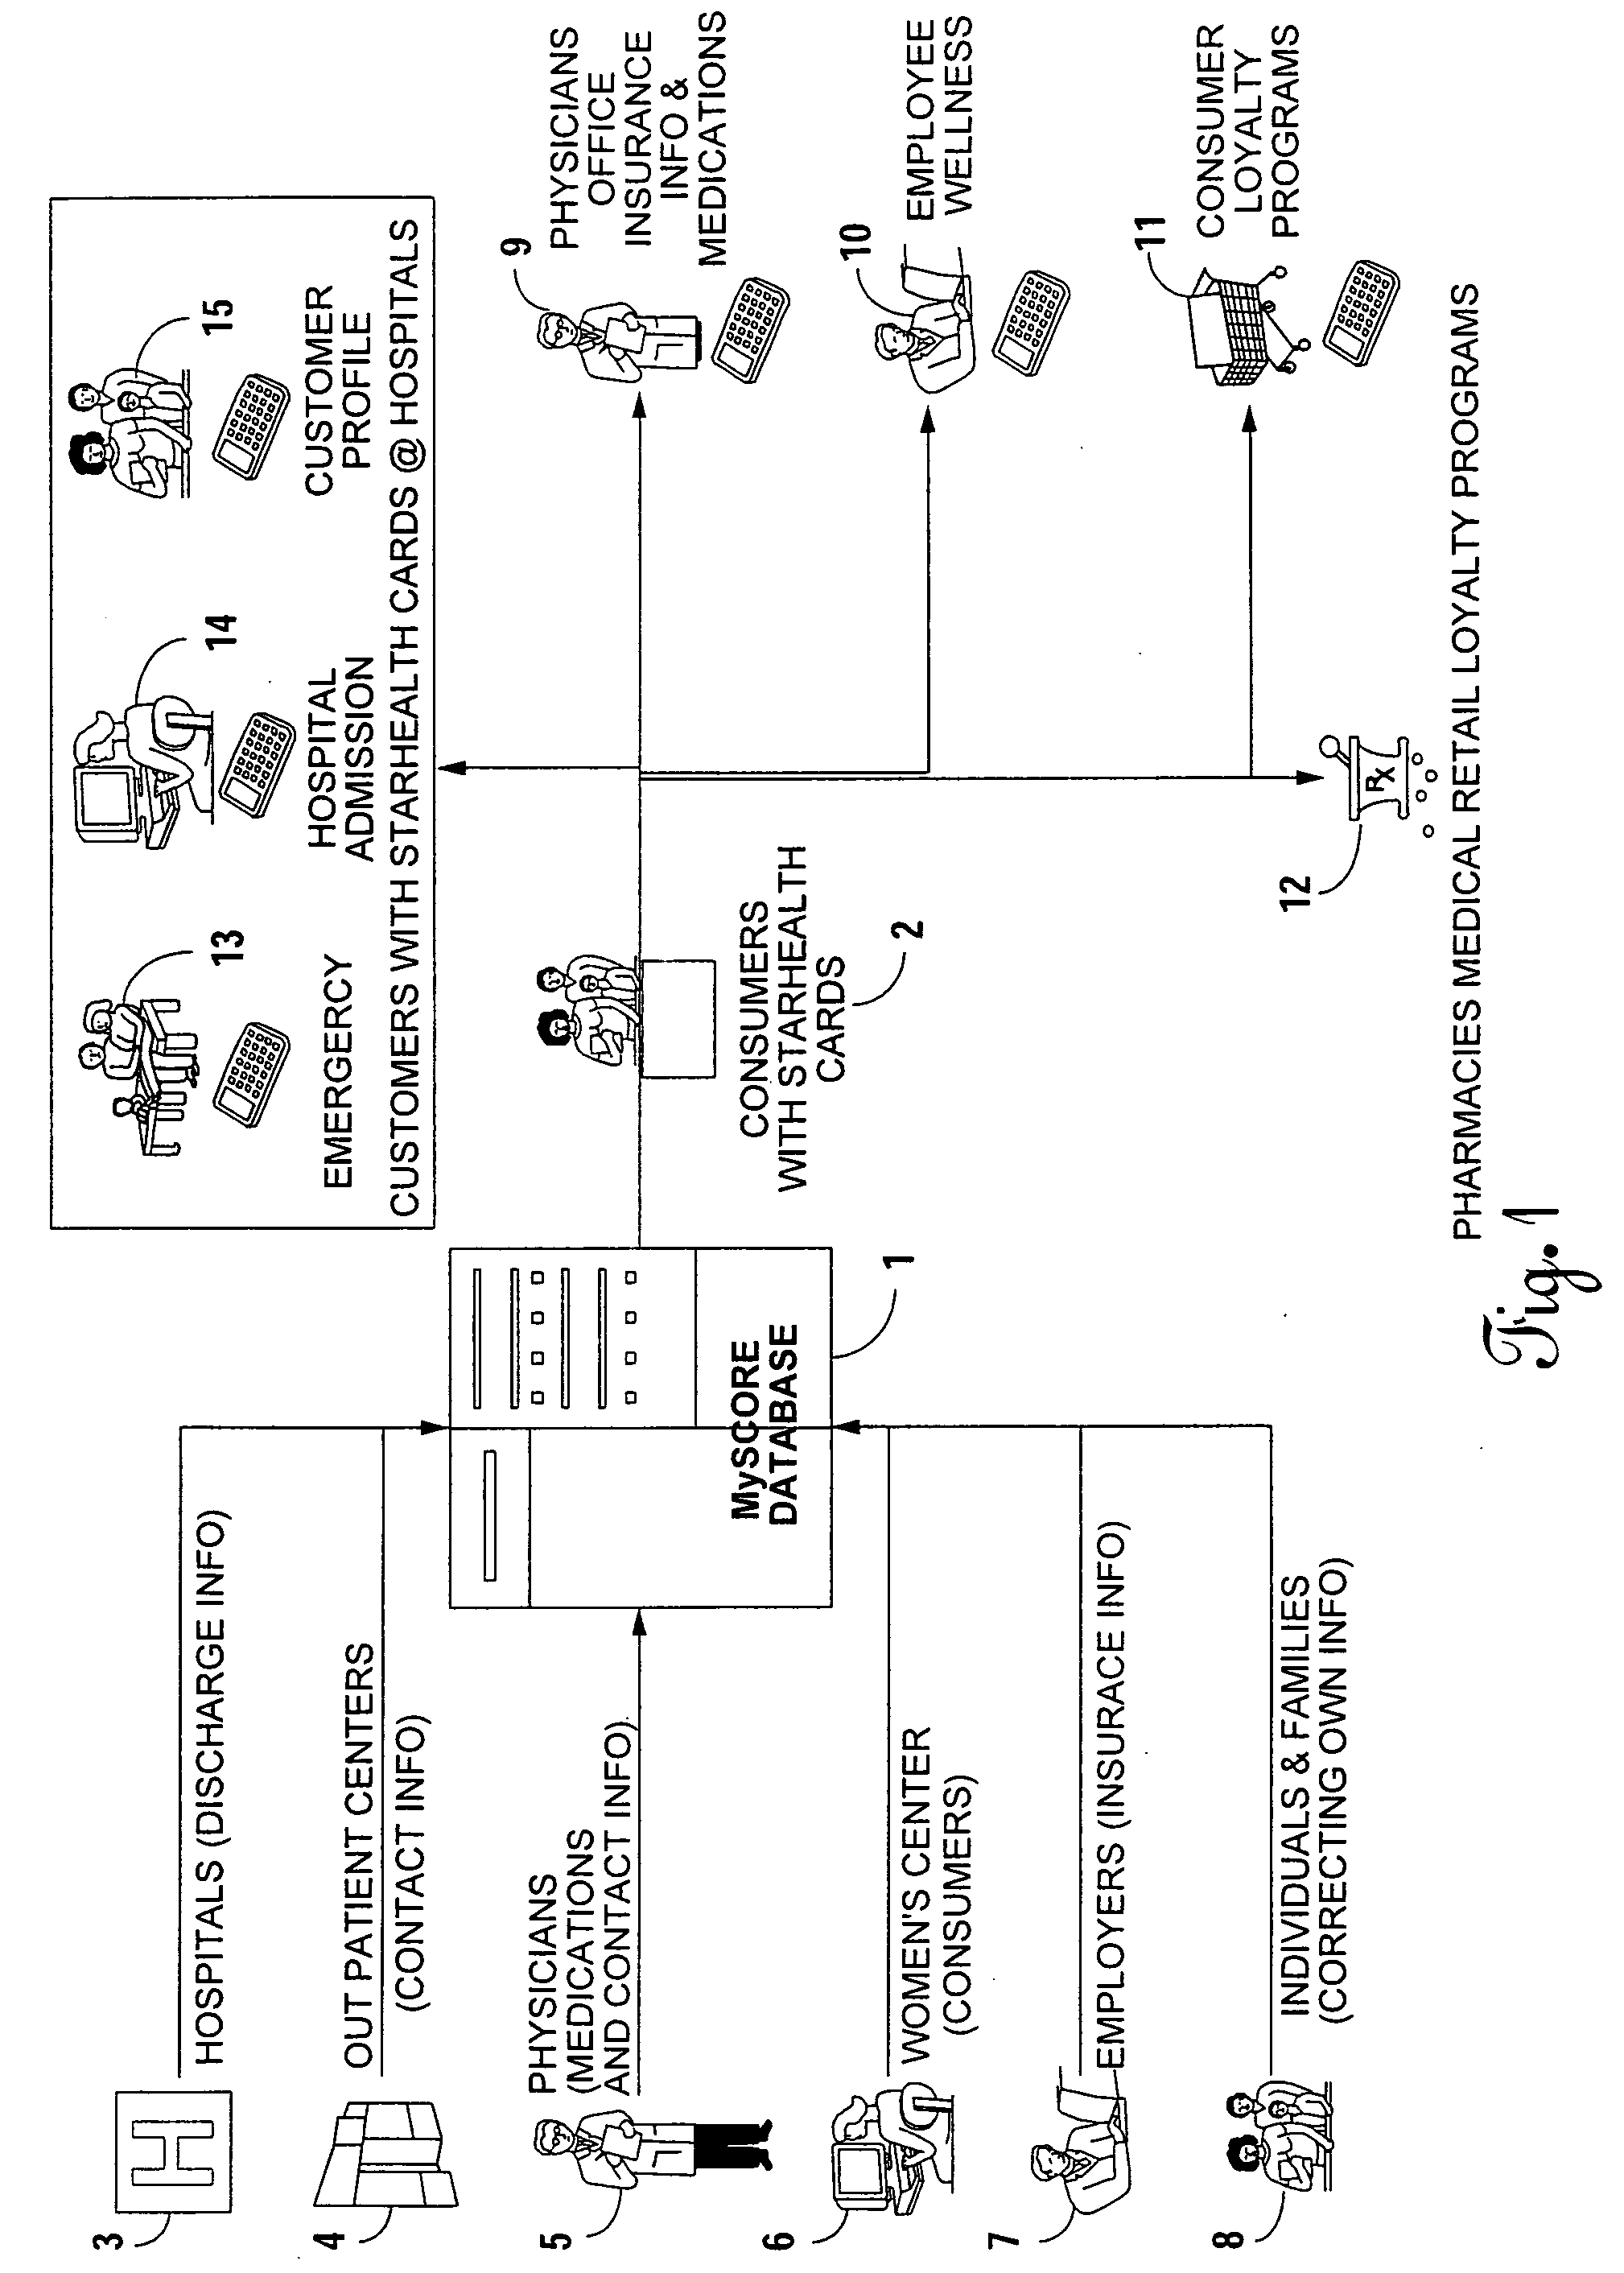 System and method for storage and dissemination of personal health information